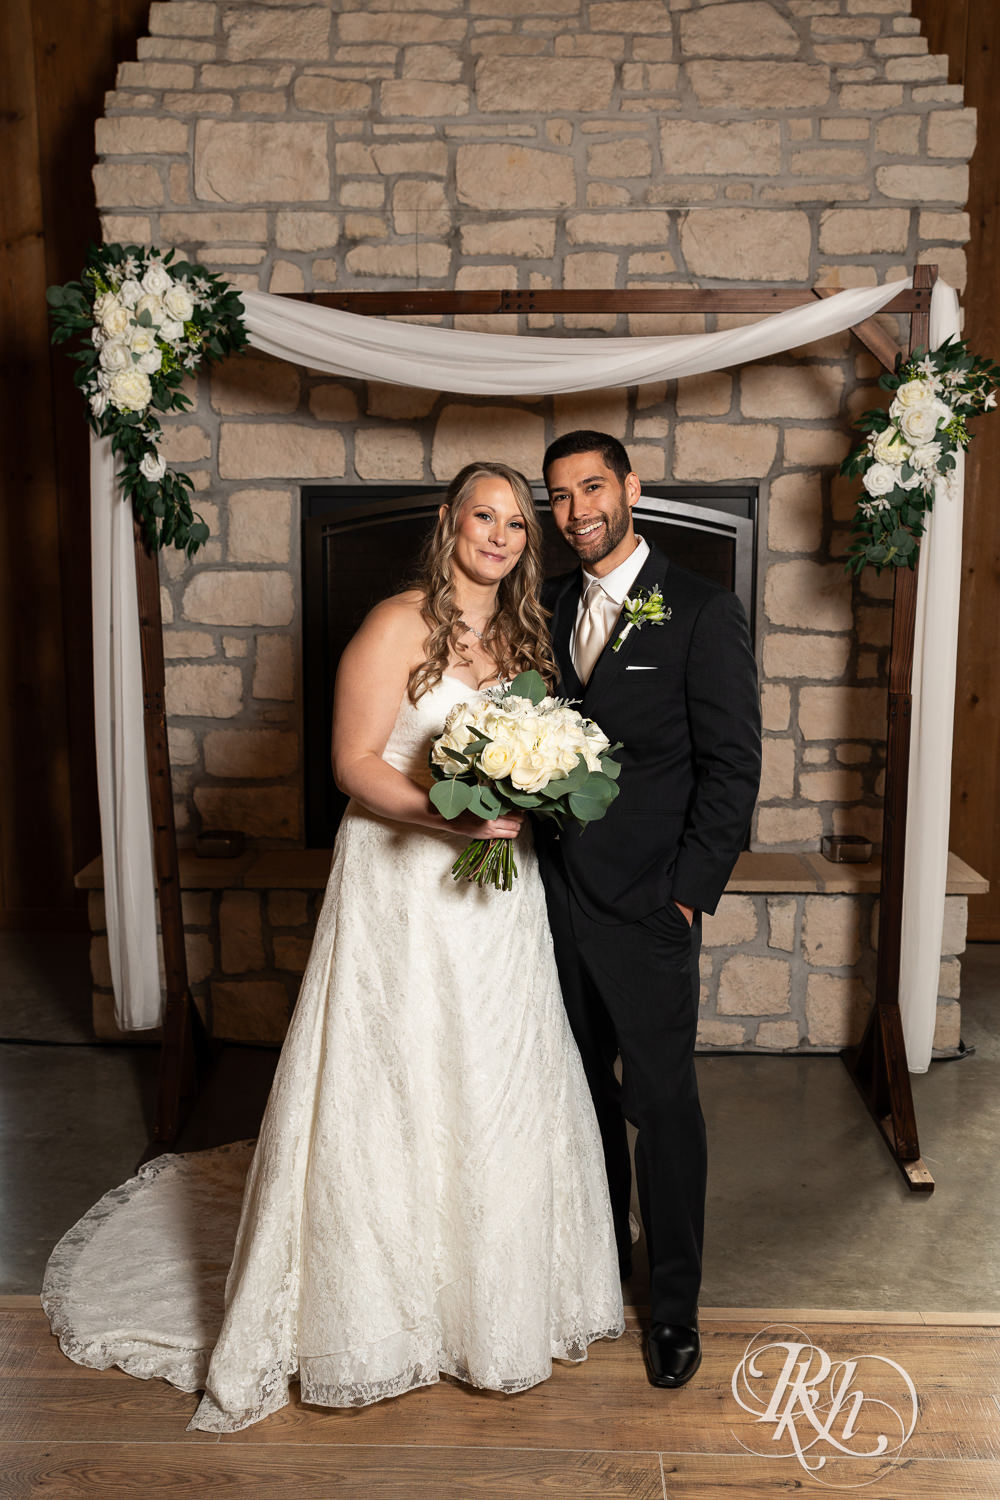 Bride and groom smile in front of a fireplace at Almquist Farm in Hastings, Minnesota.